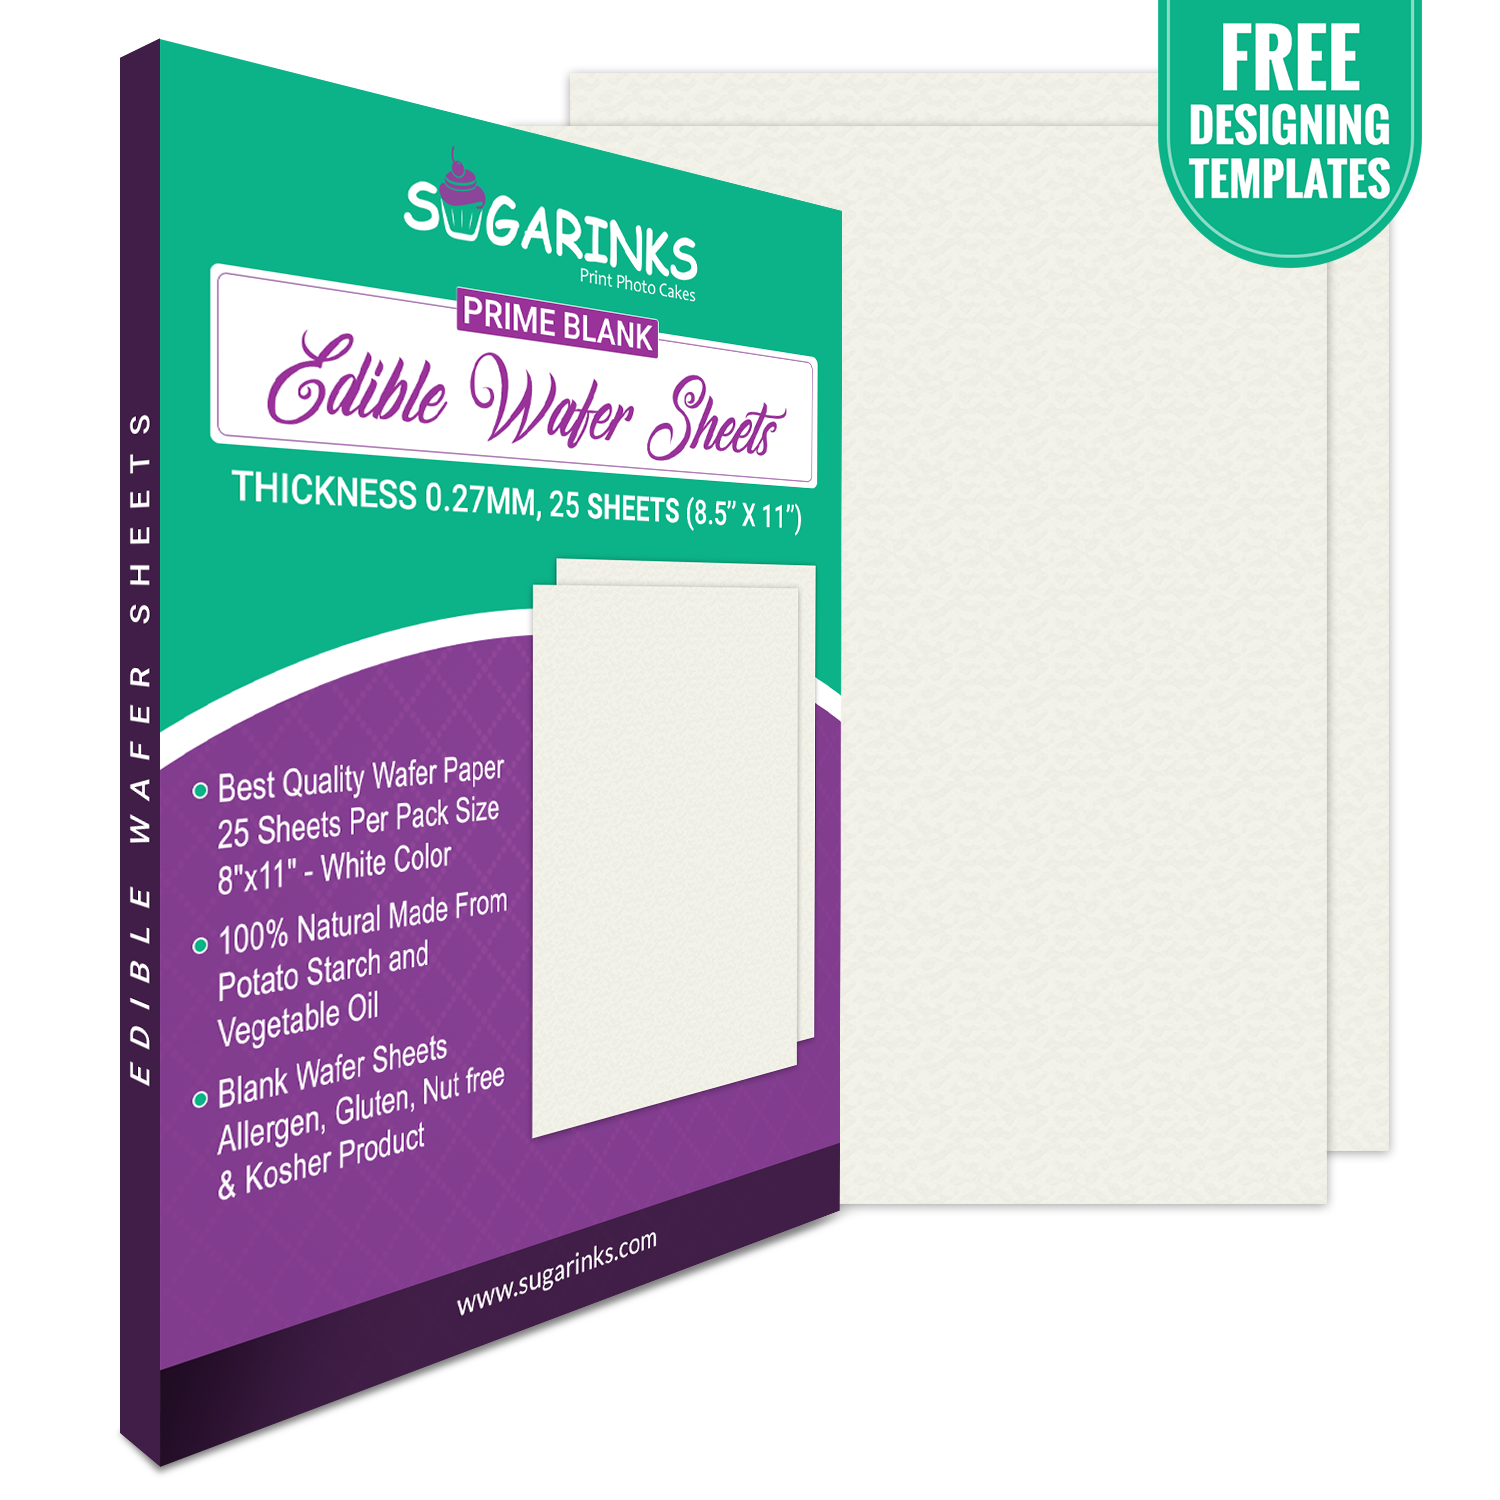 Sugarinks Blank Wafer Sheets For Cakes and Cookies Pack of 25 Sheets A4 size Premium Quality– 0.27mm Thickness 